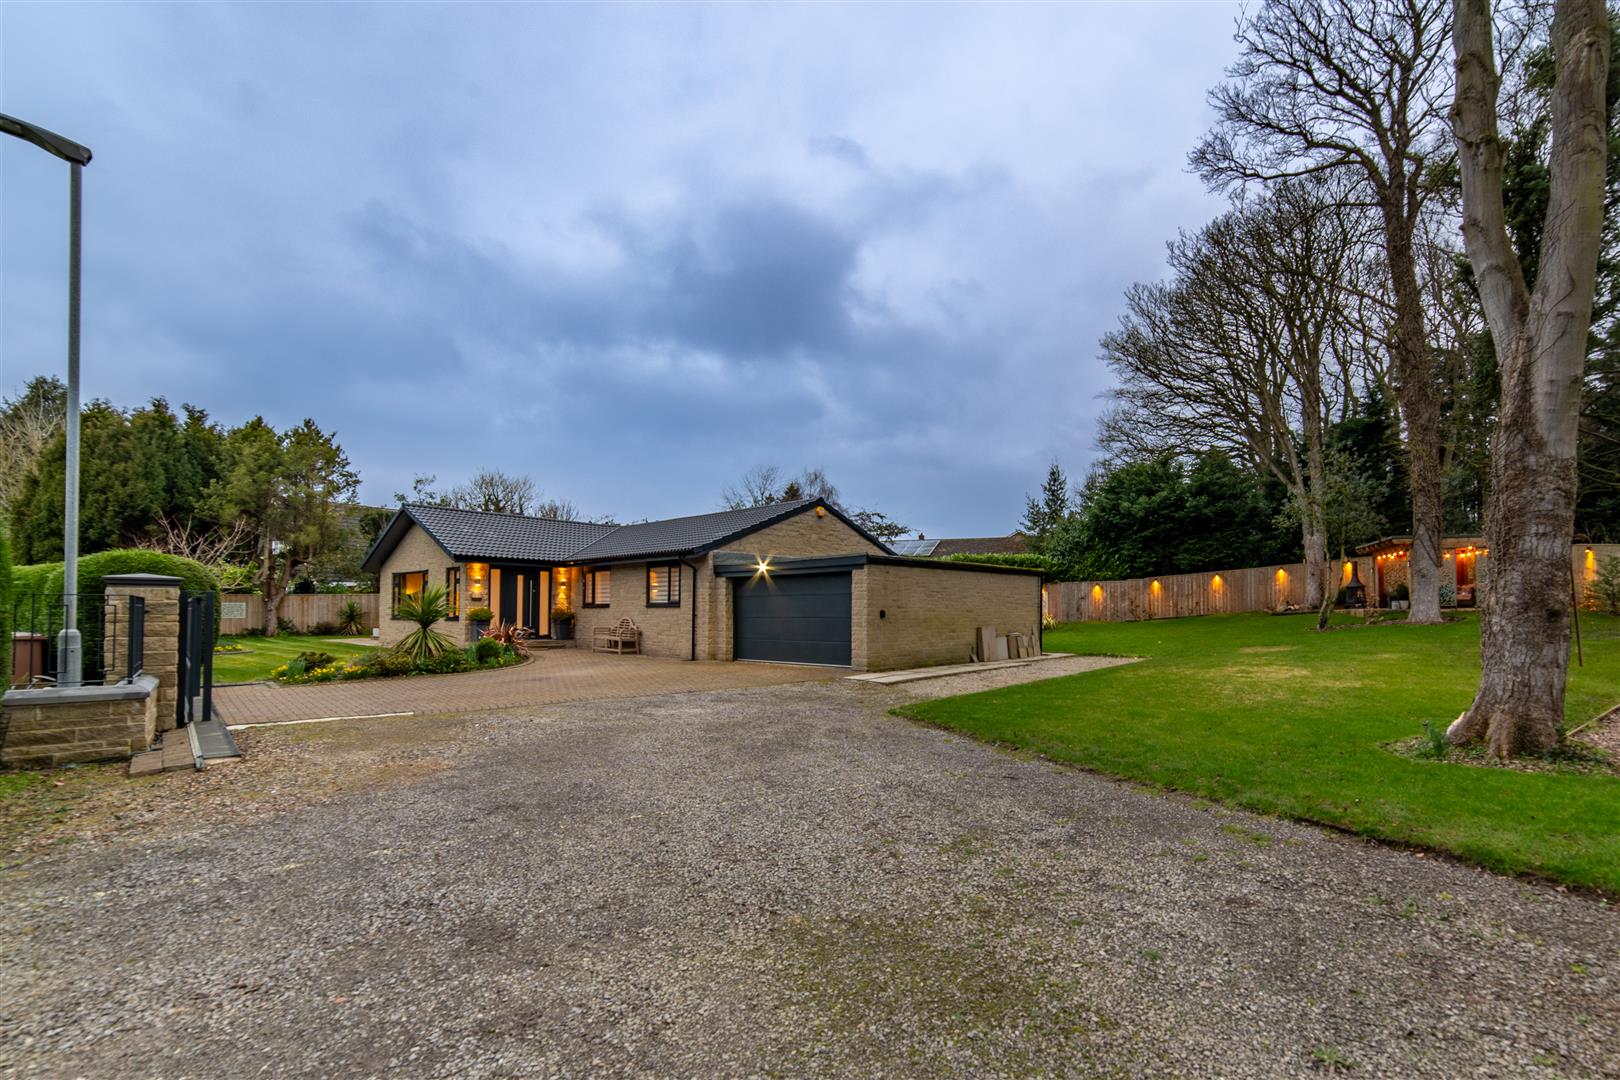 3 bed detached bungalow for sale in Crofts Park, Morpeth, NE61